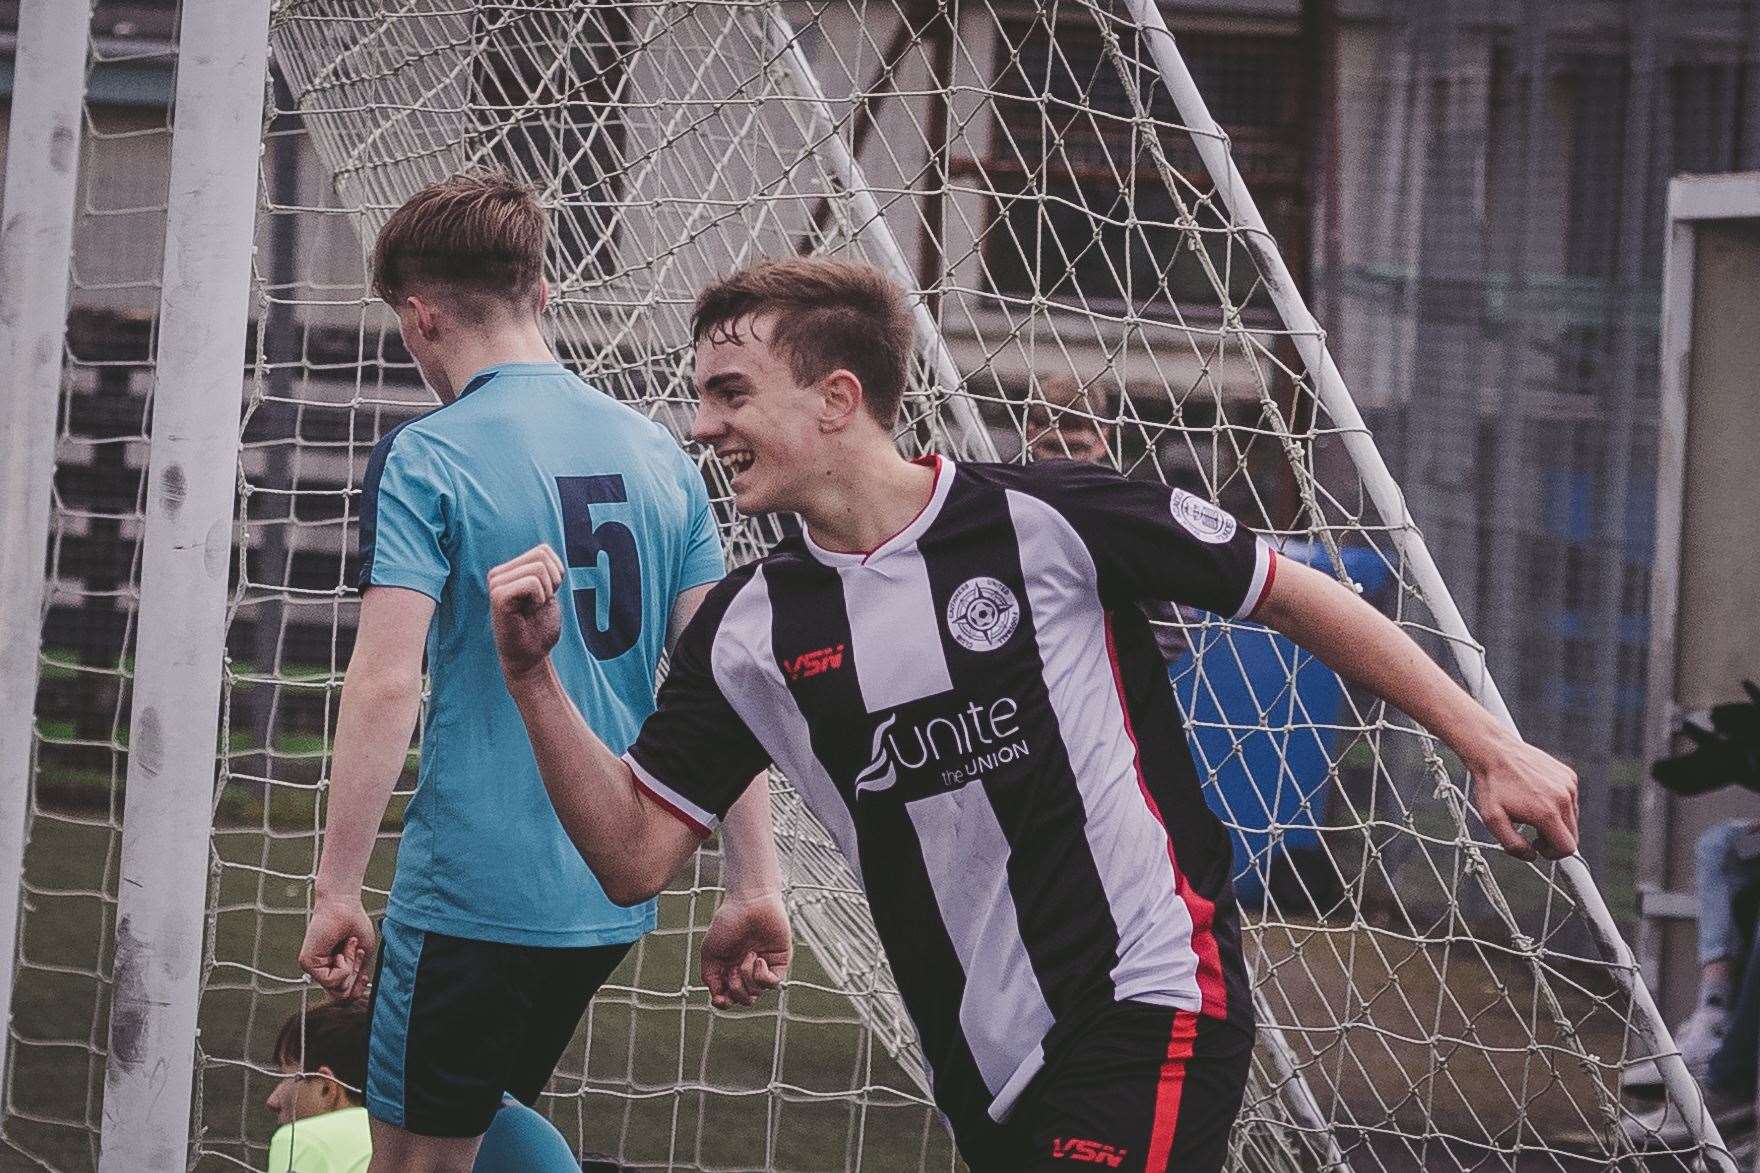 Josh Hughes celebrating a goal for Caithness United in Sunday's match. Picture: Colin Campbell Photography